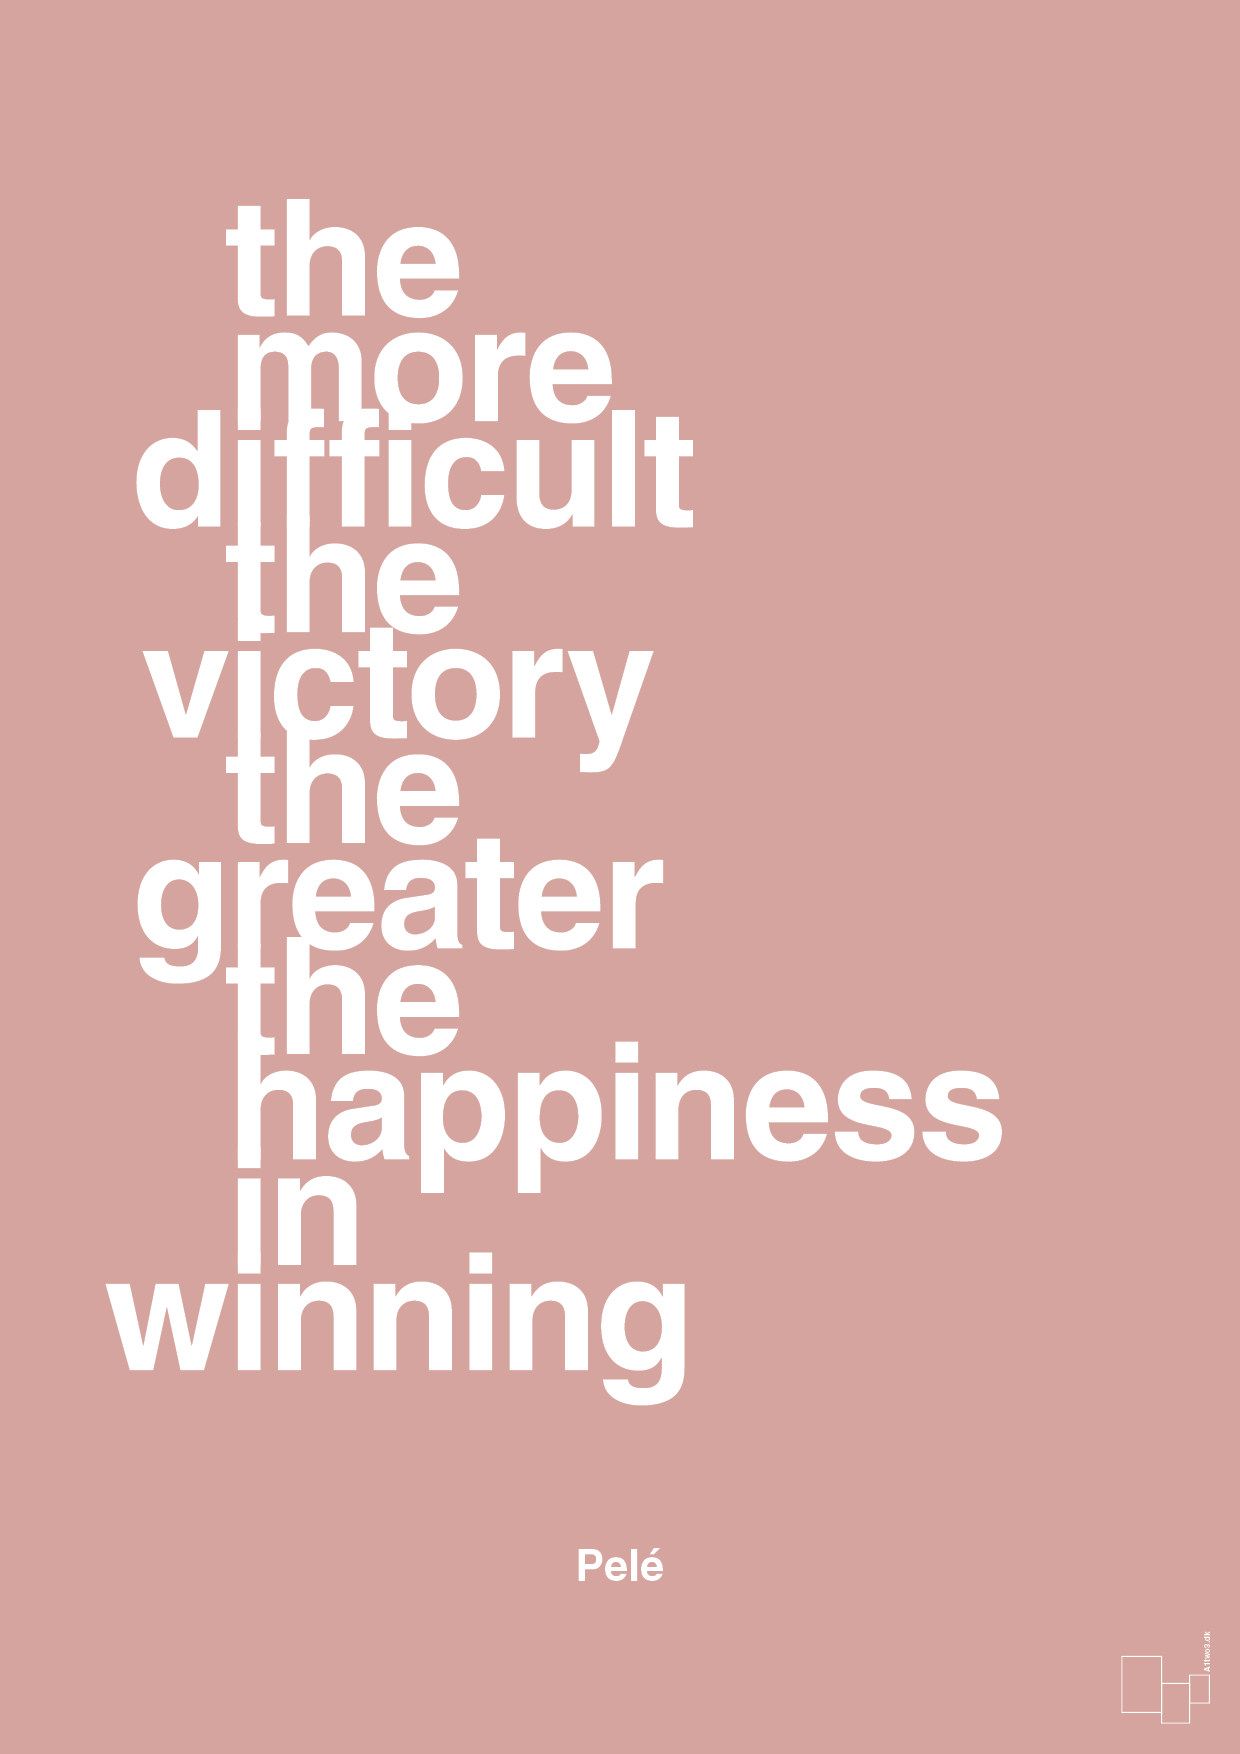 the more difficult the victory the greater the happiness in winning - Plakat med Citater i Bubble Shell